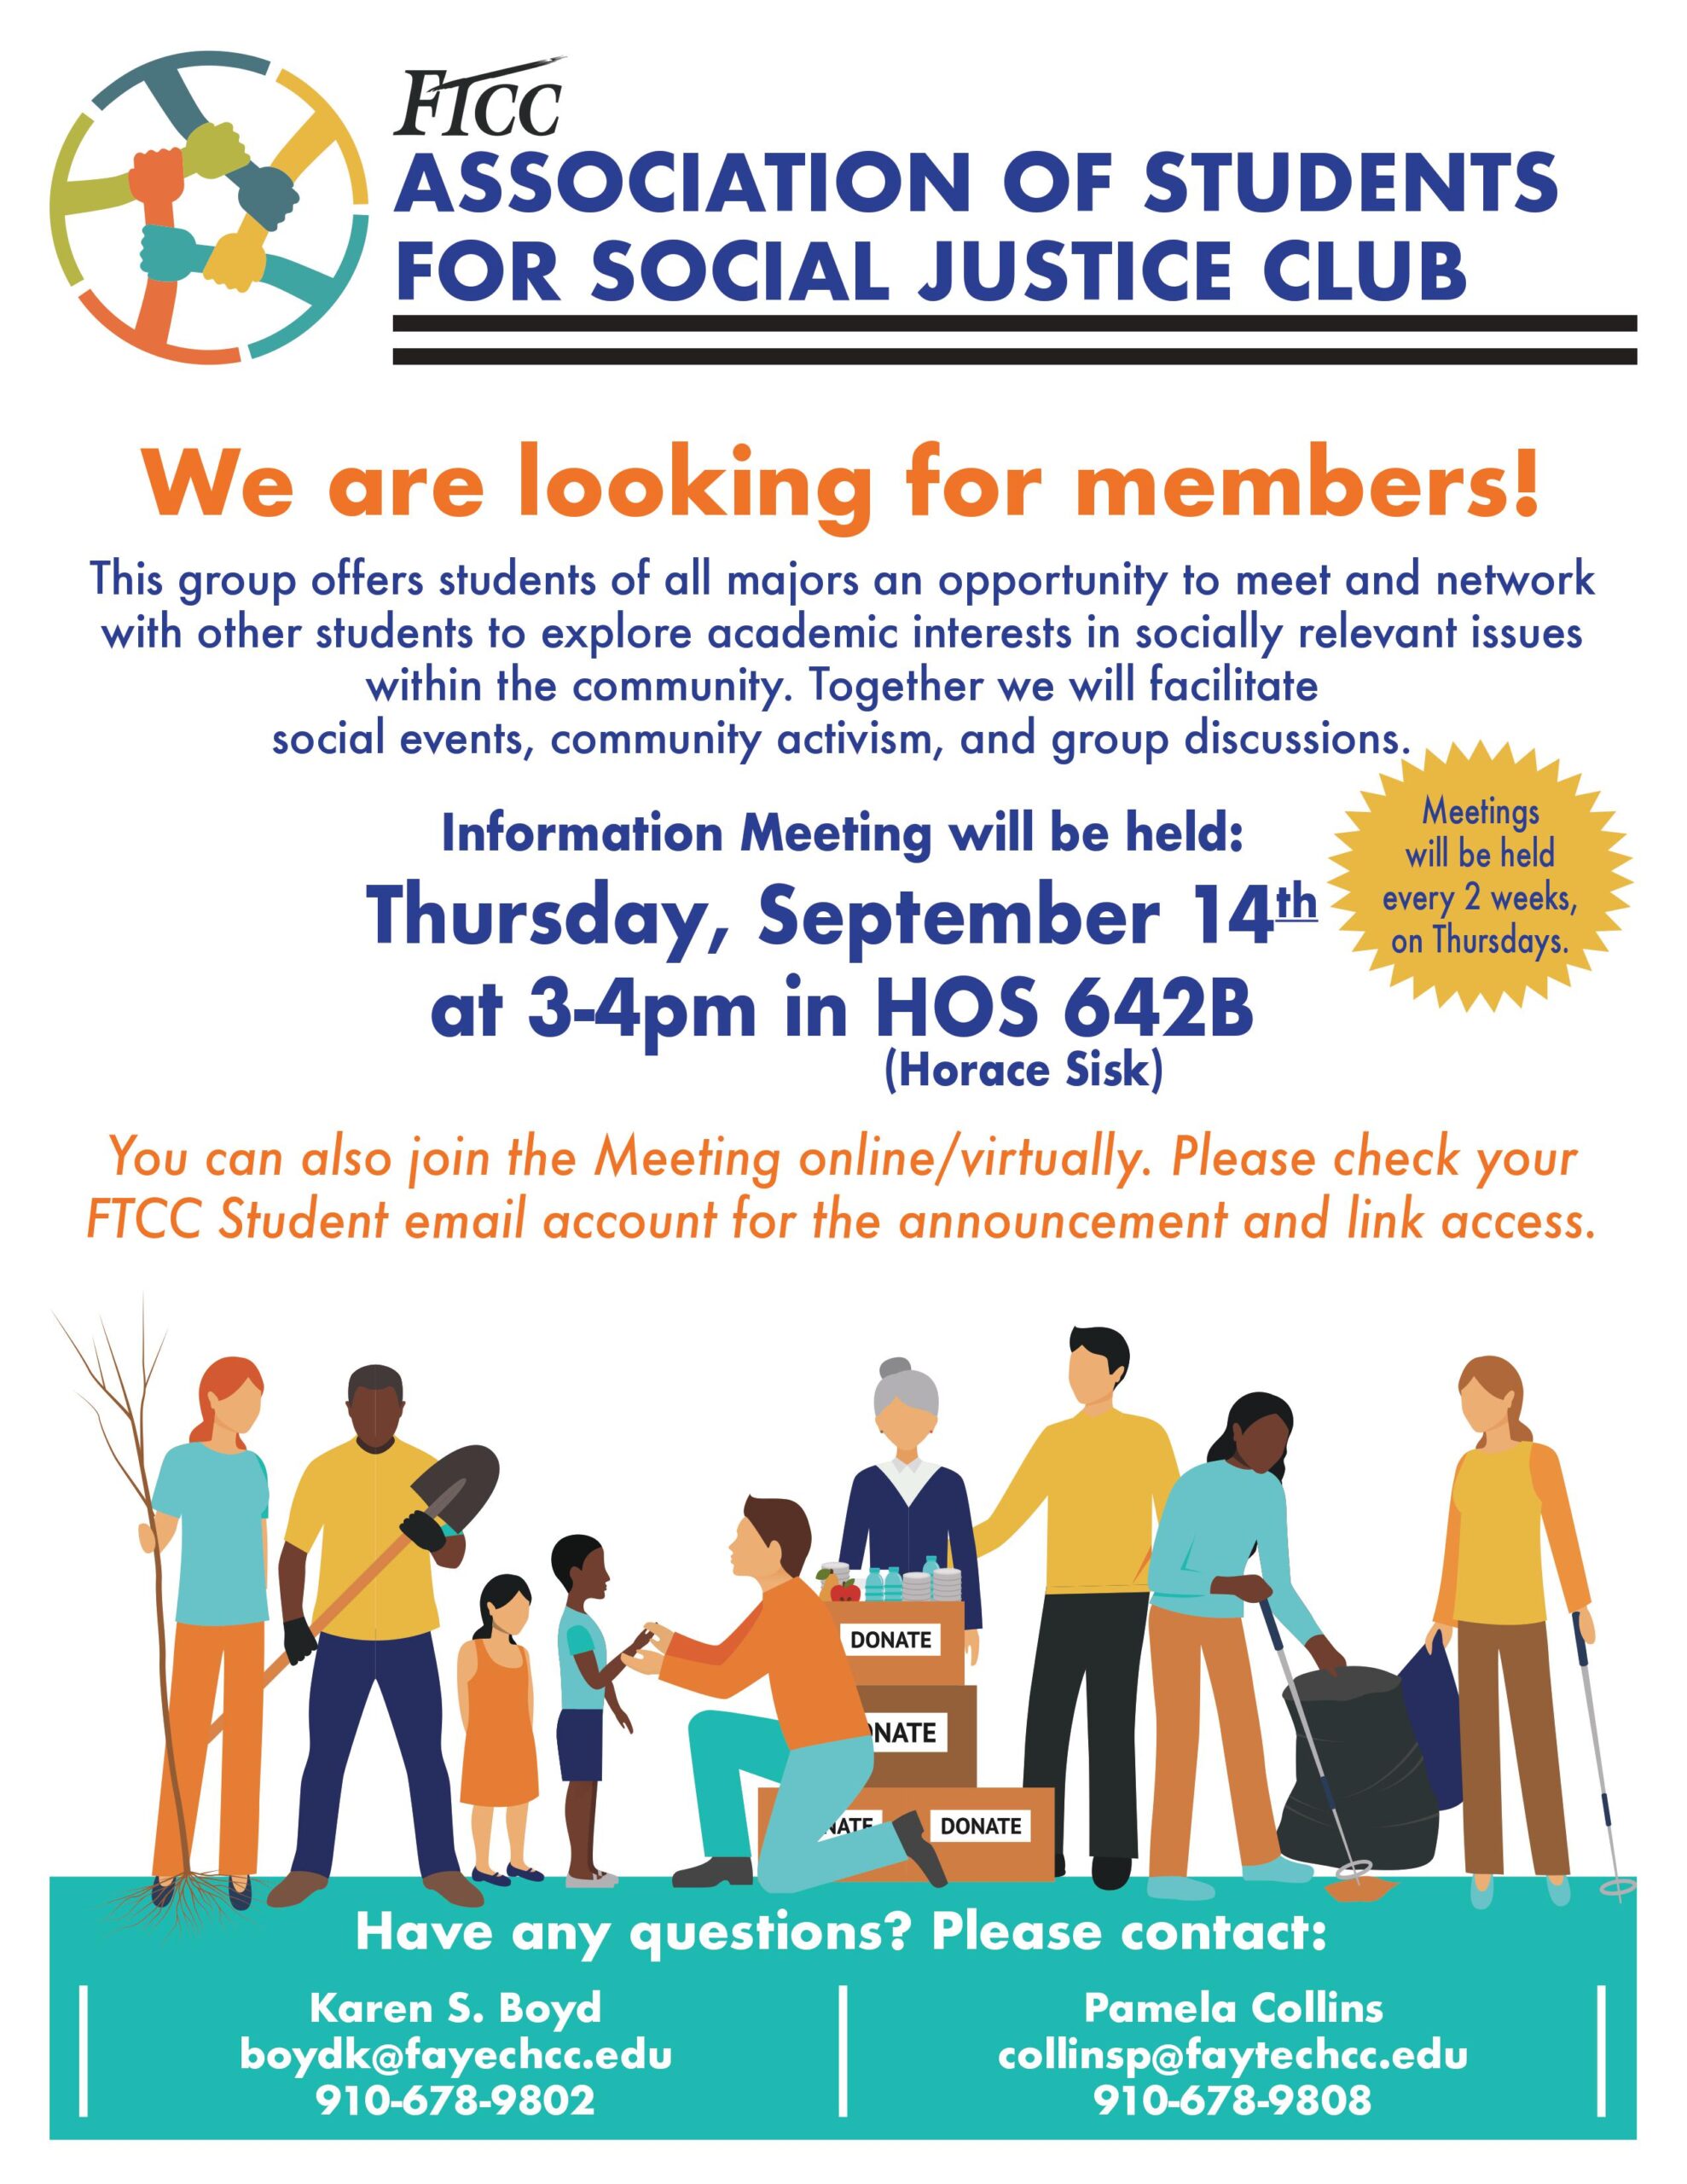 Association of Students for Social Justice Club meeting flyer